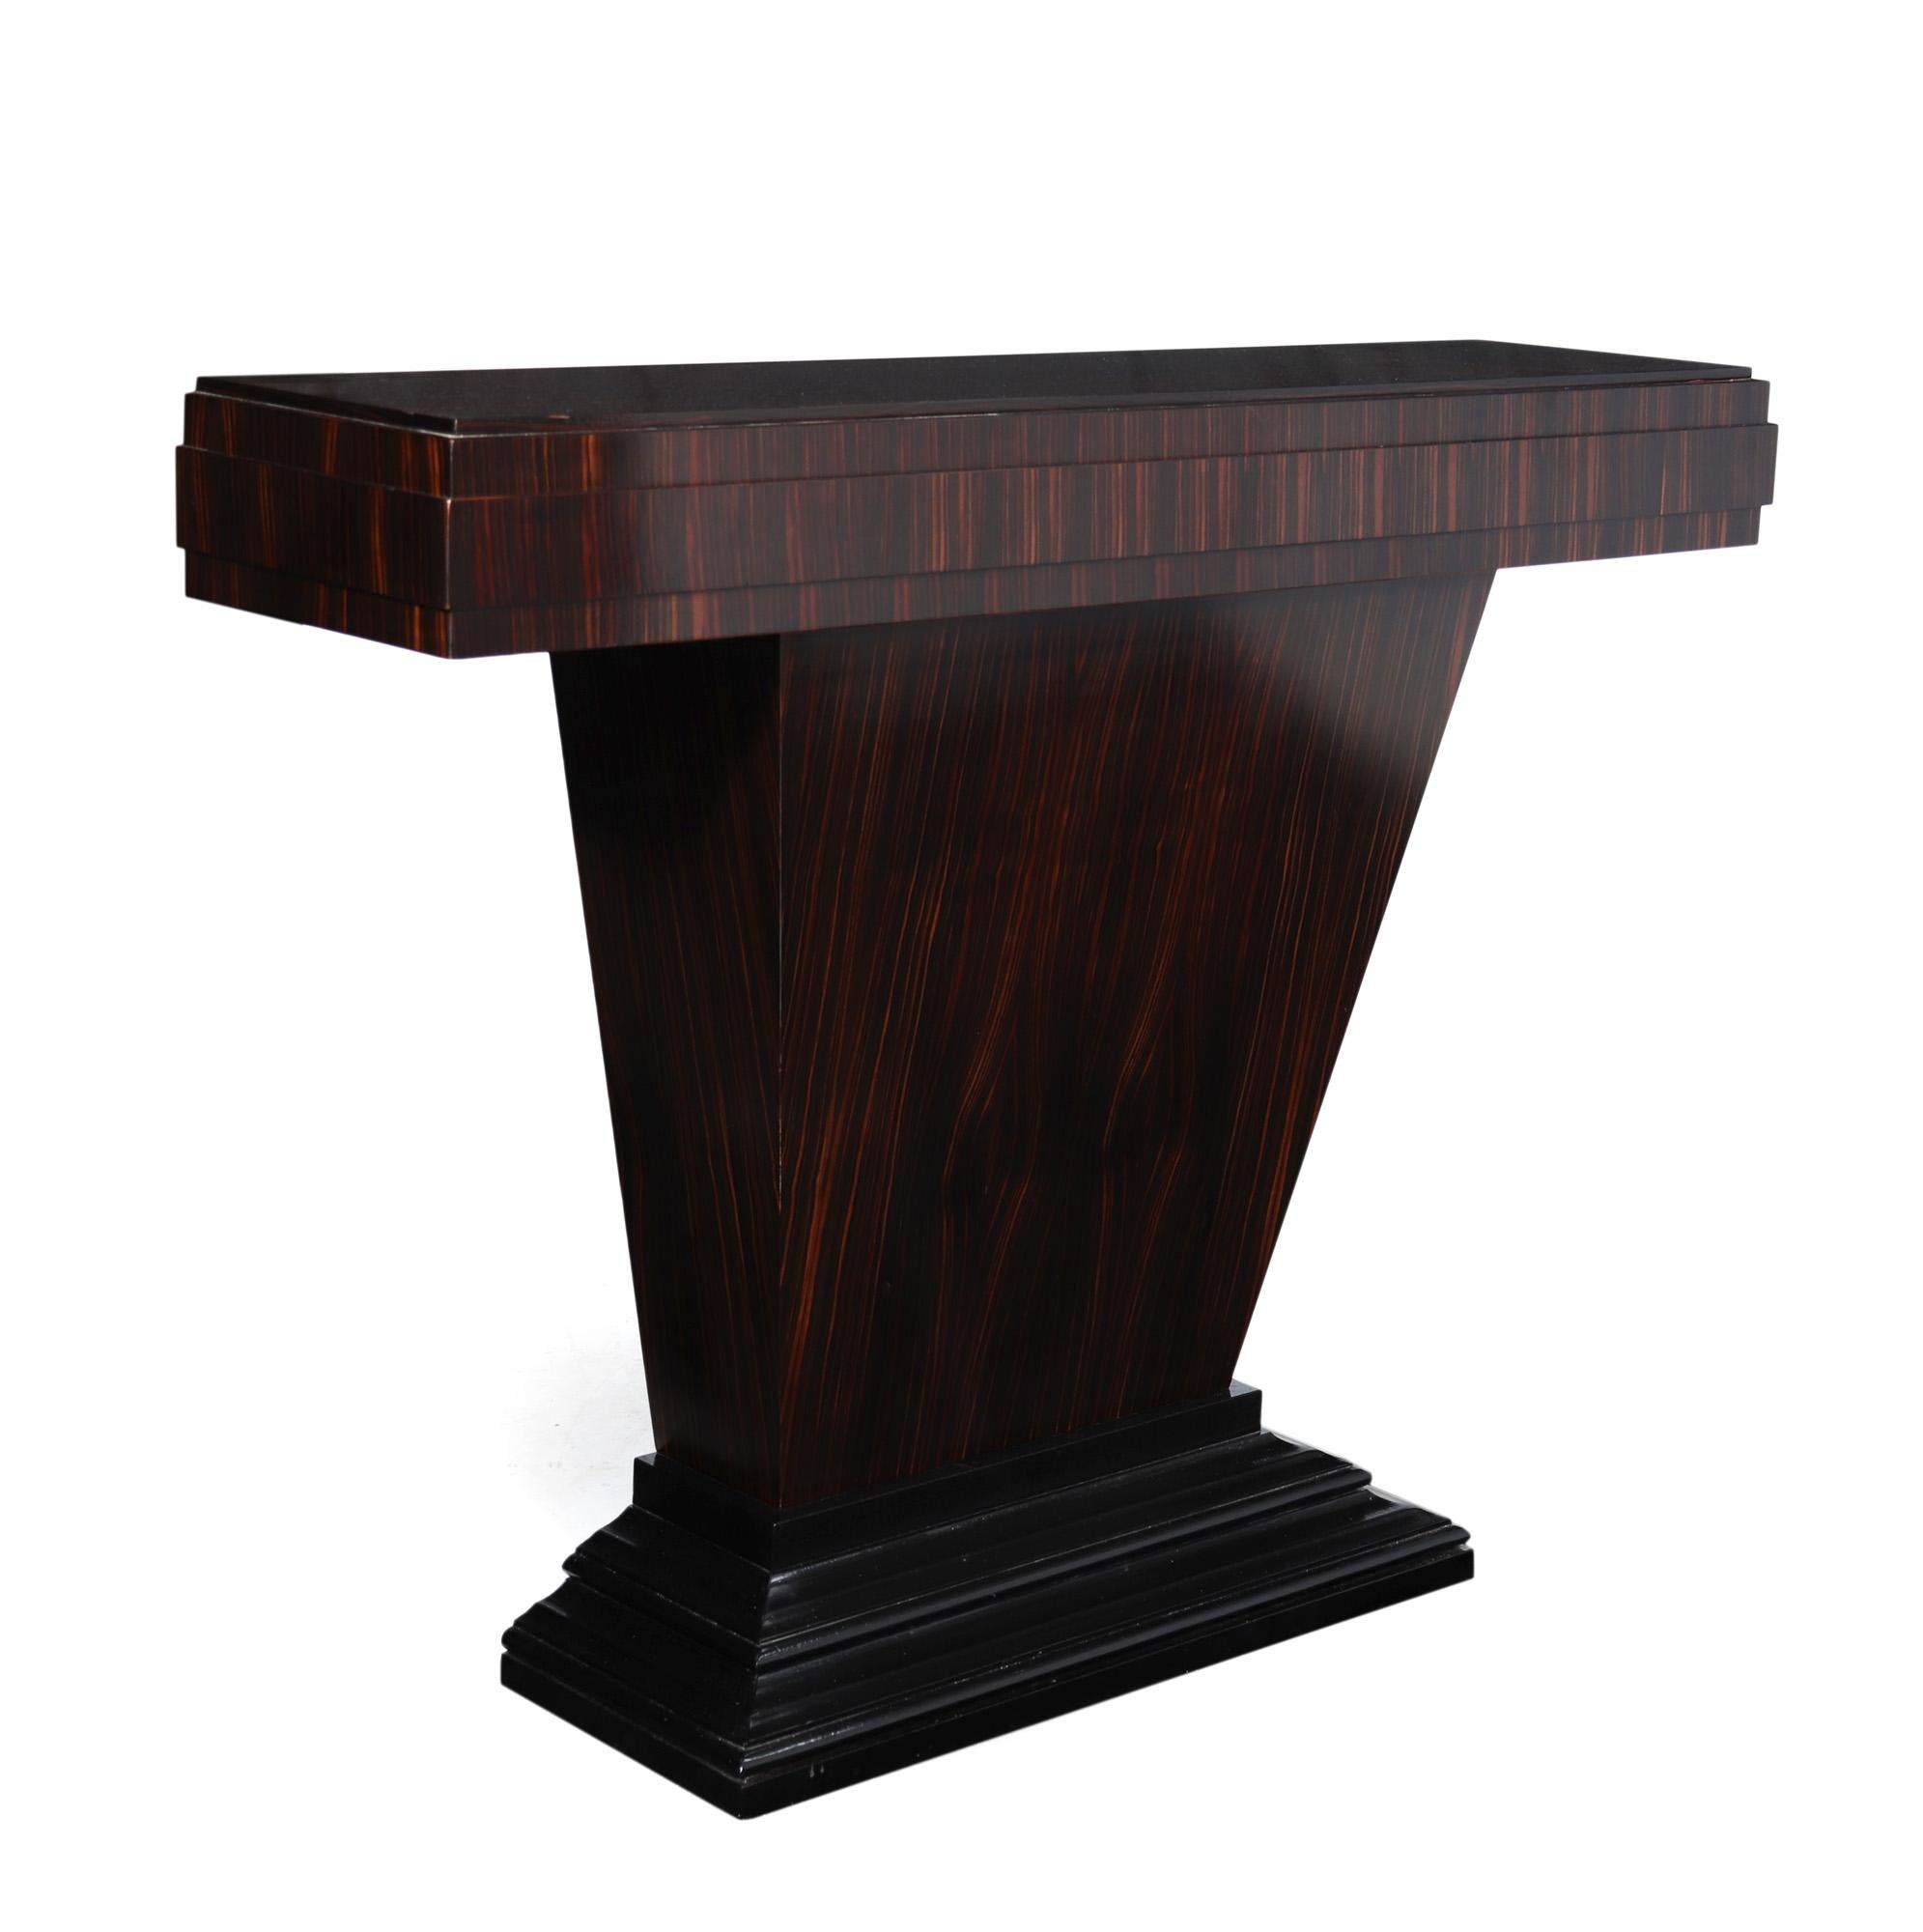 European Art Deco Console Table in Macassar Ebony by Thomas London For Sale